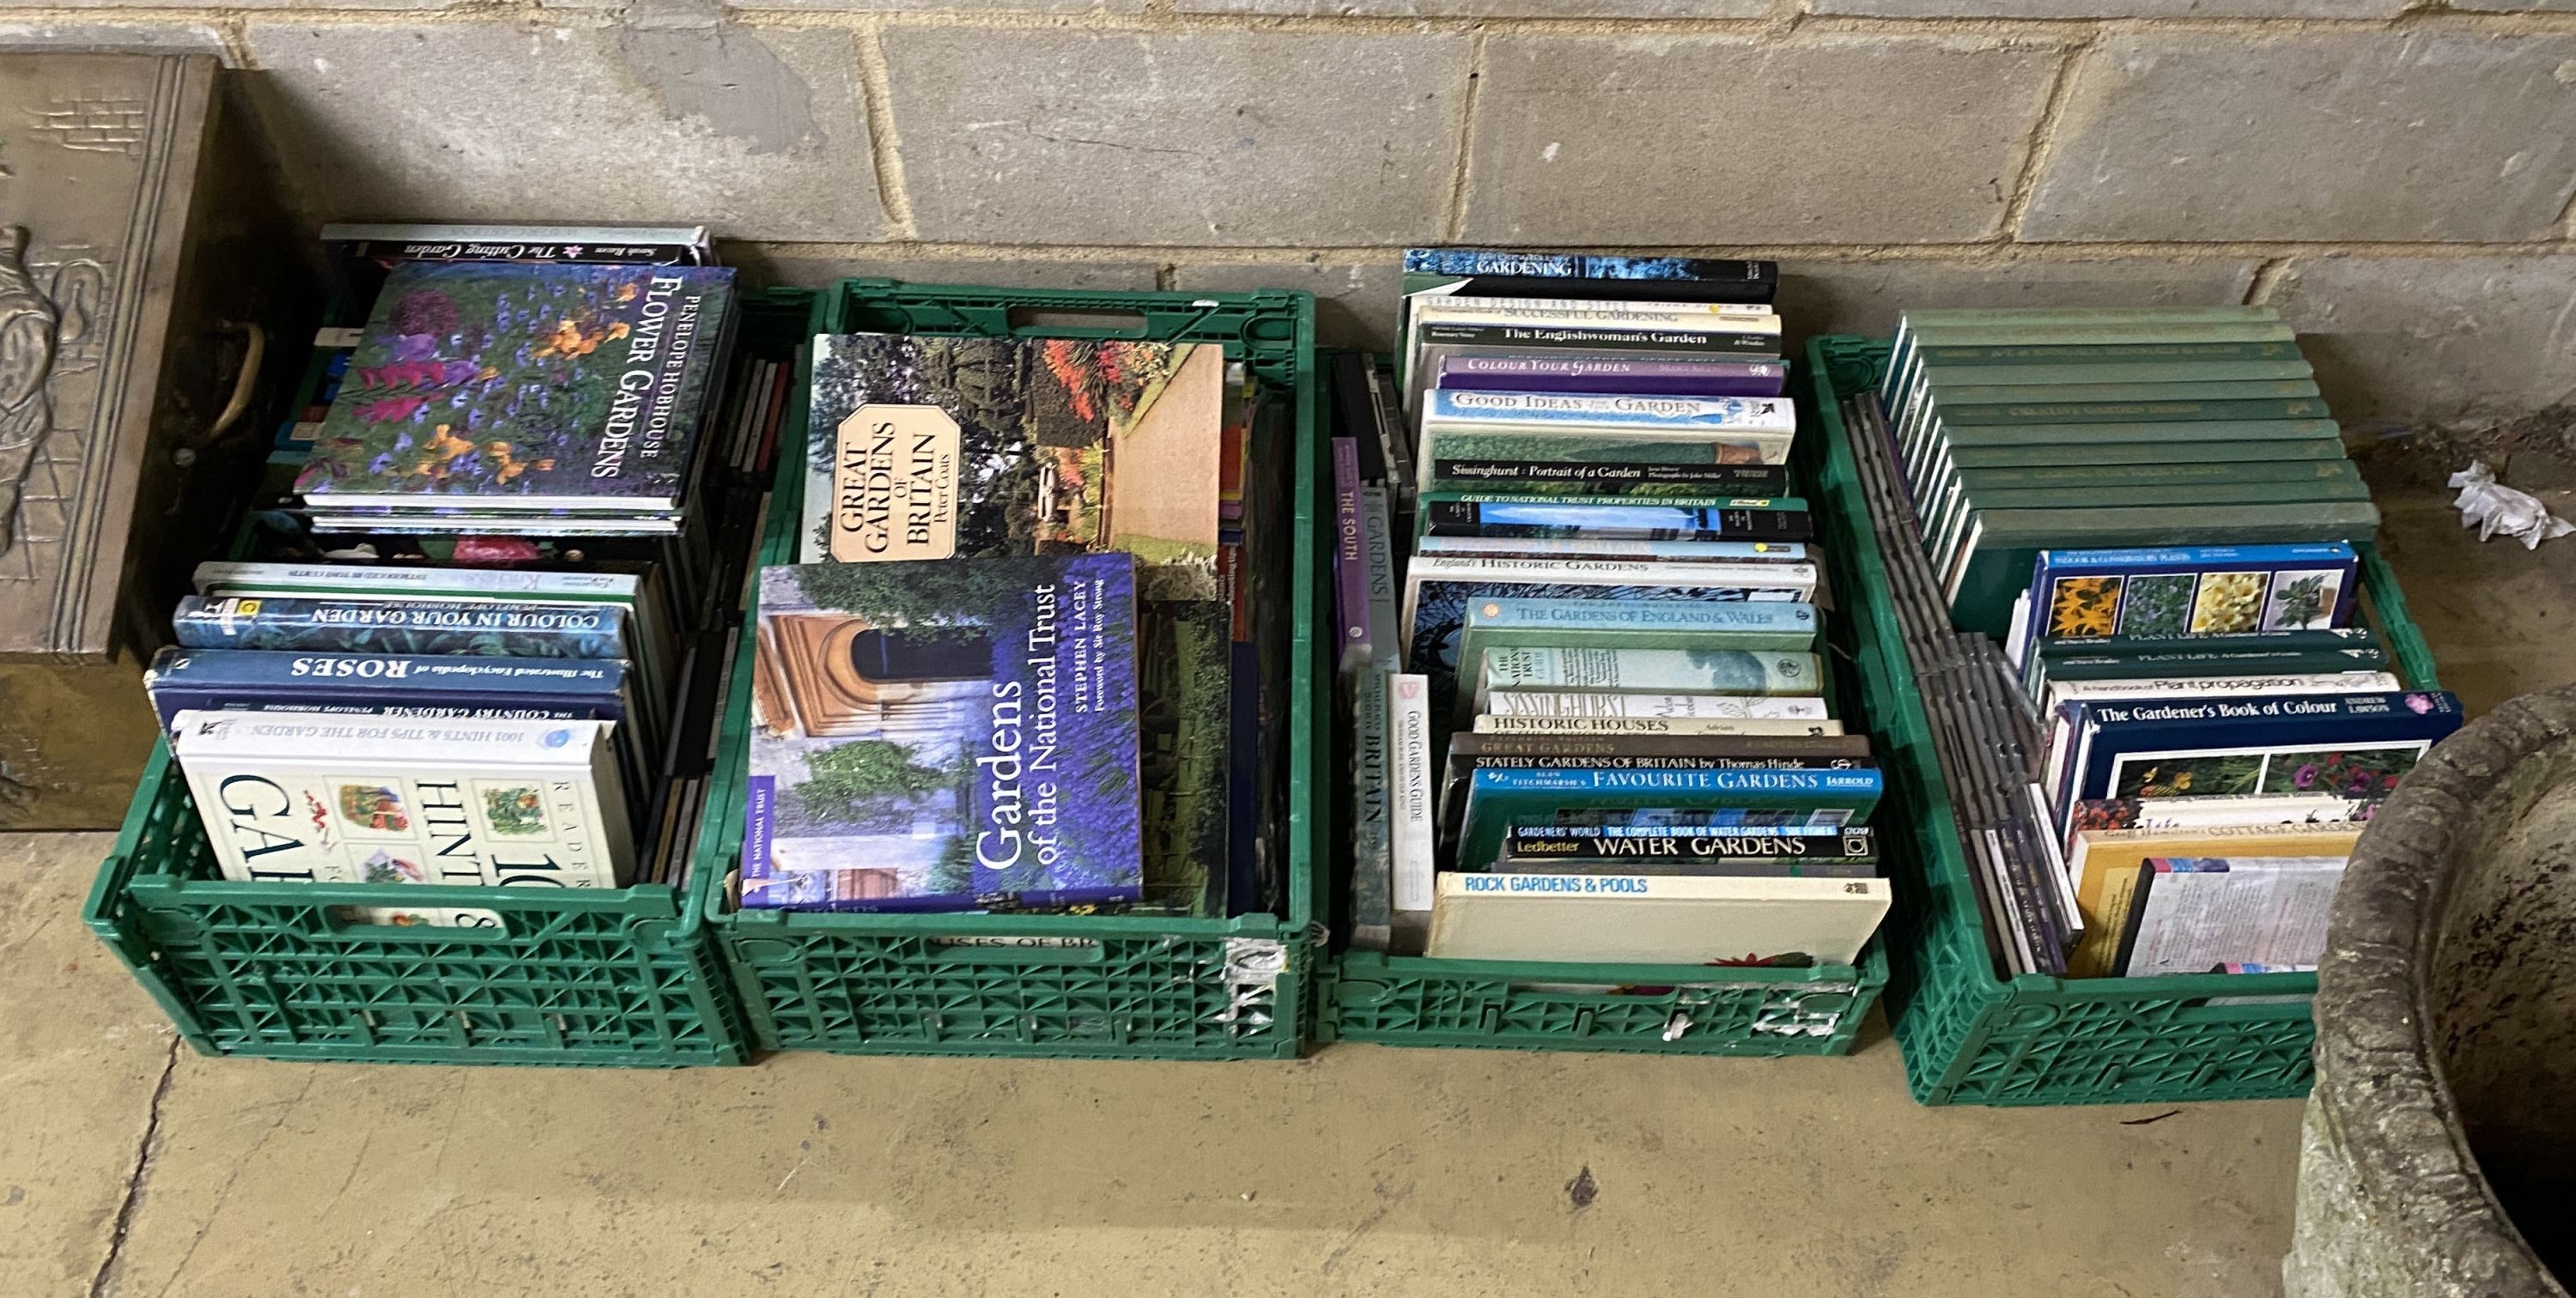 A large quantity of assorted books relating to gardening